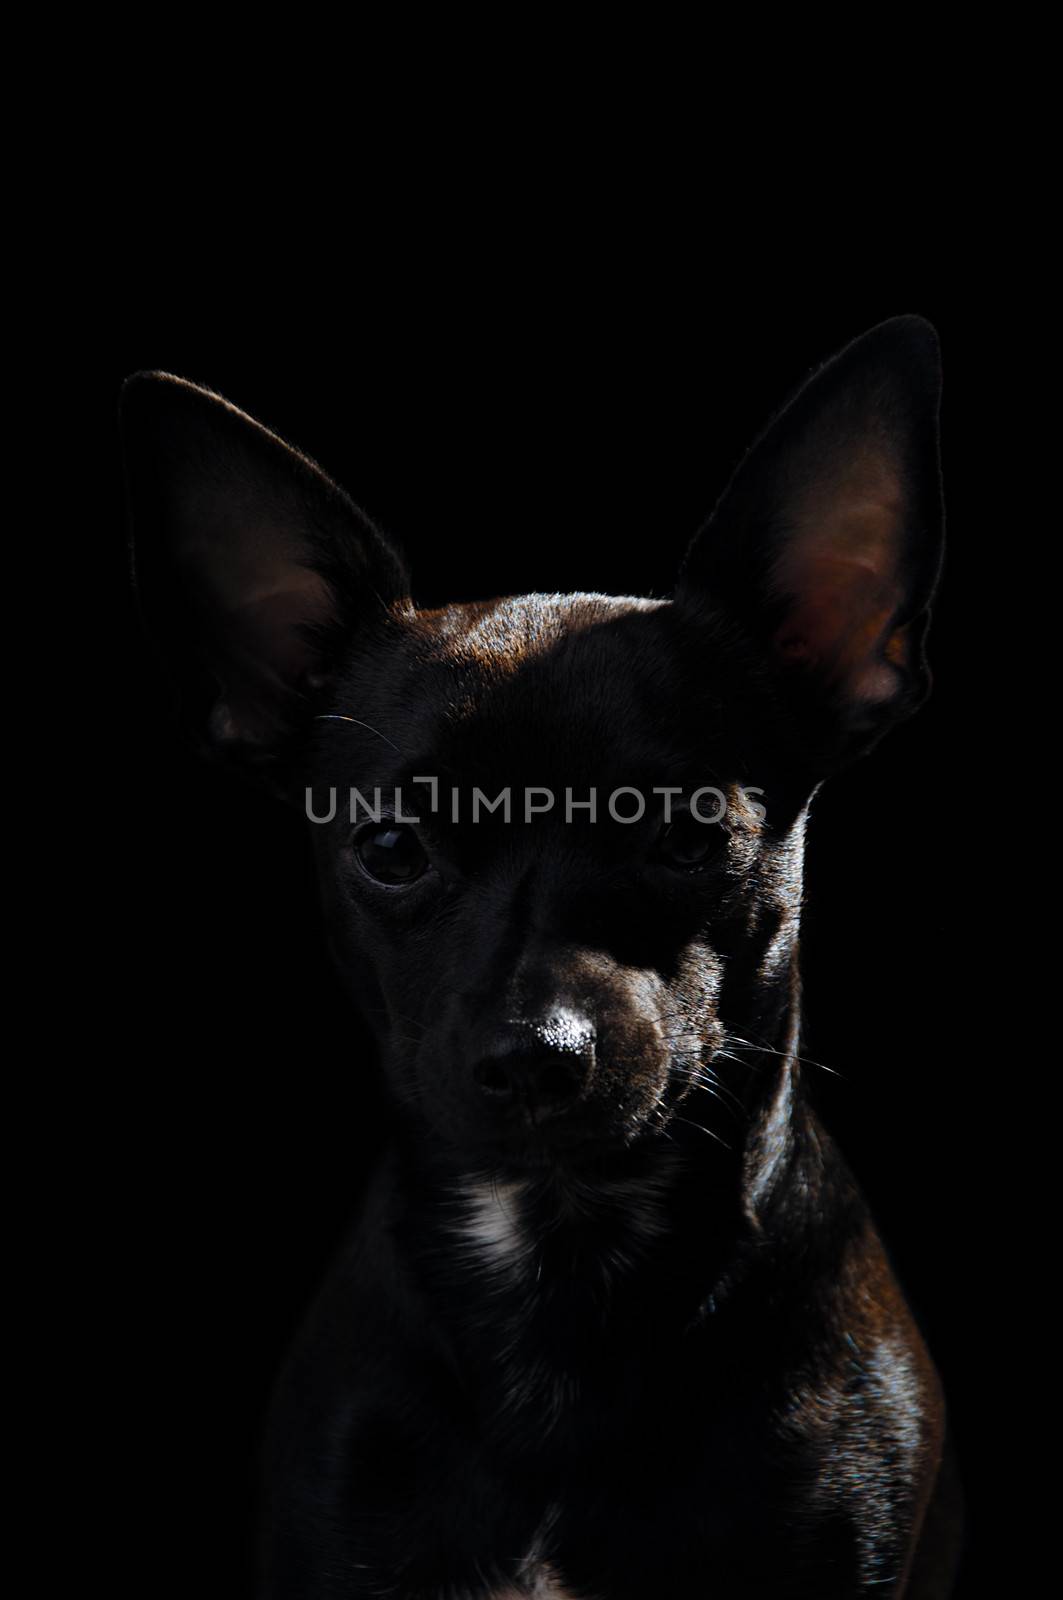 Sweet puppy dog on a black background. Mix of a miniature pincher and a chihuahua.